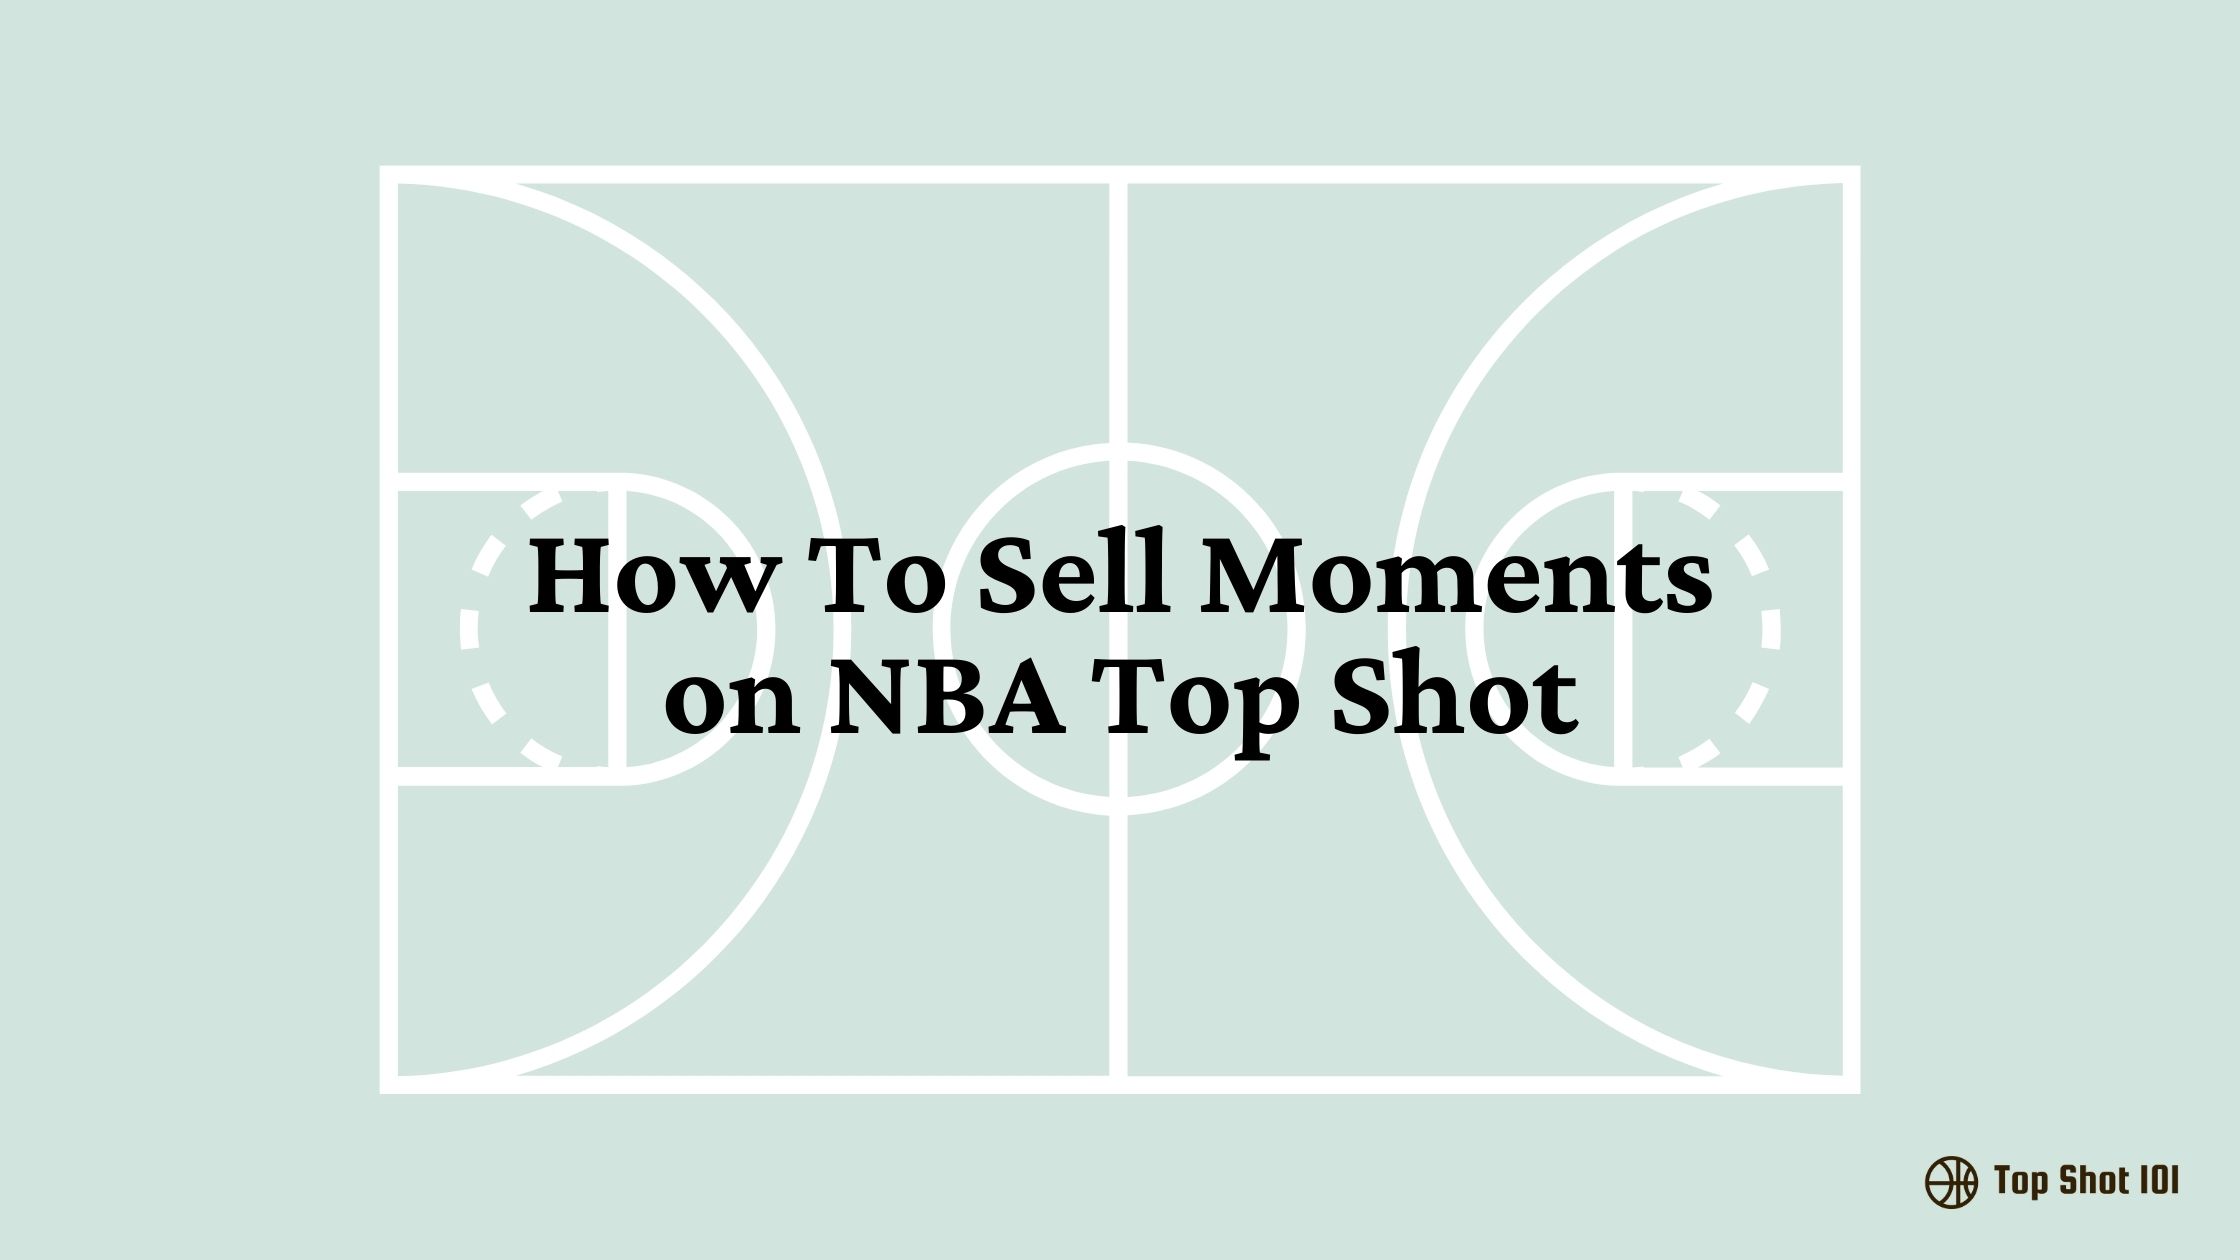 How to Buy, Collect, and Sell NBA Top Shot Moments